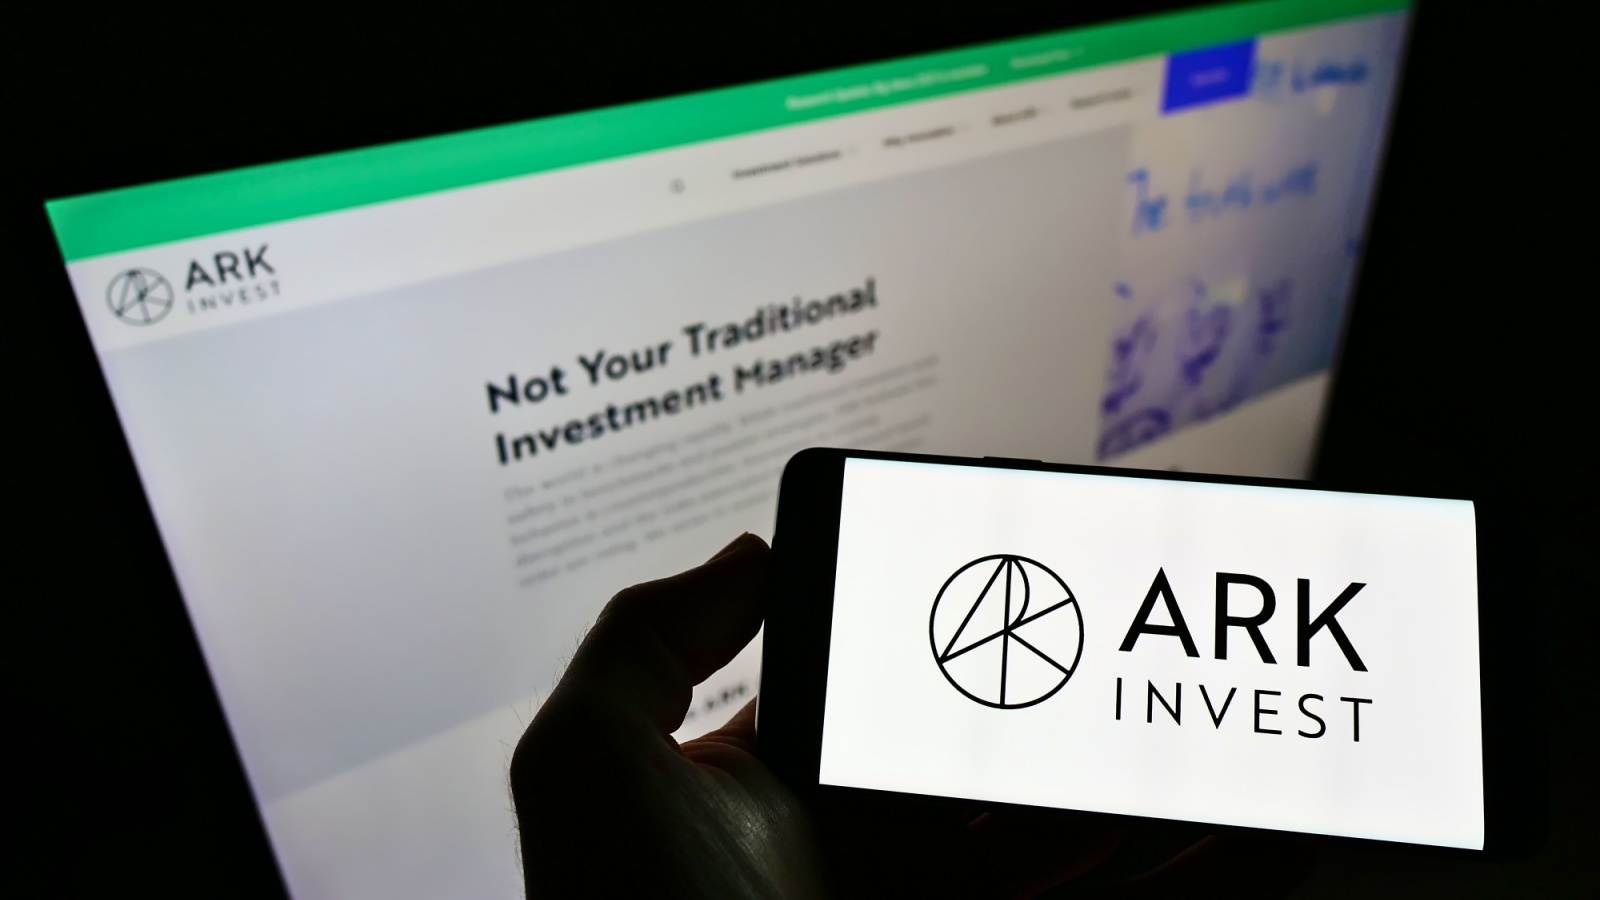 Ark Invest logo displayed on mobile phone with computer monitor showing Ark Invest website in background